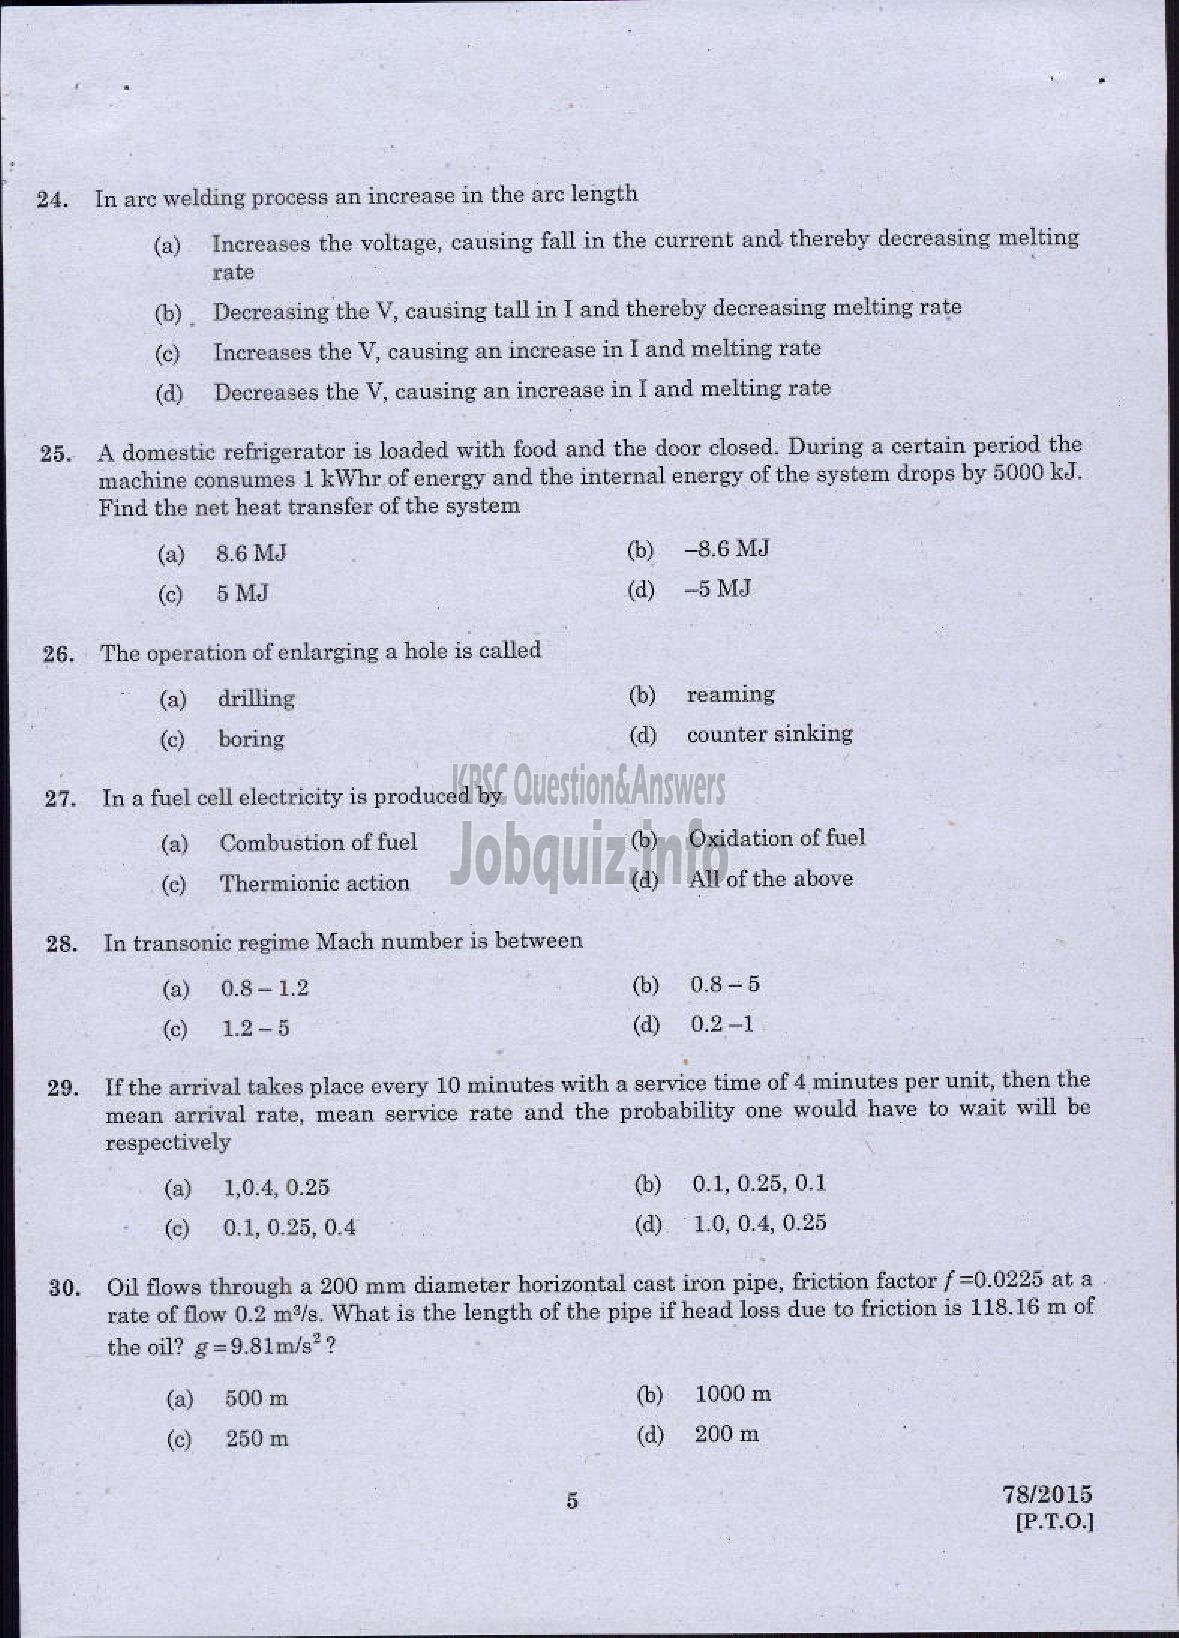 Kerala PSC Question Paper - MECHANICAL ENGINEERING-2